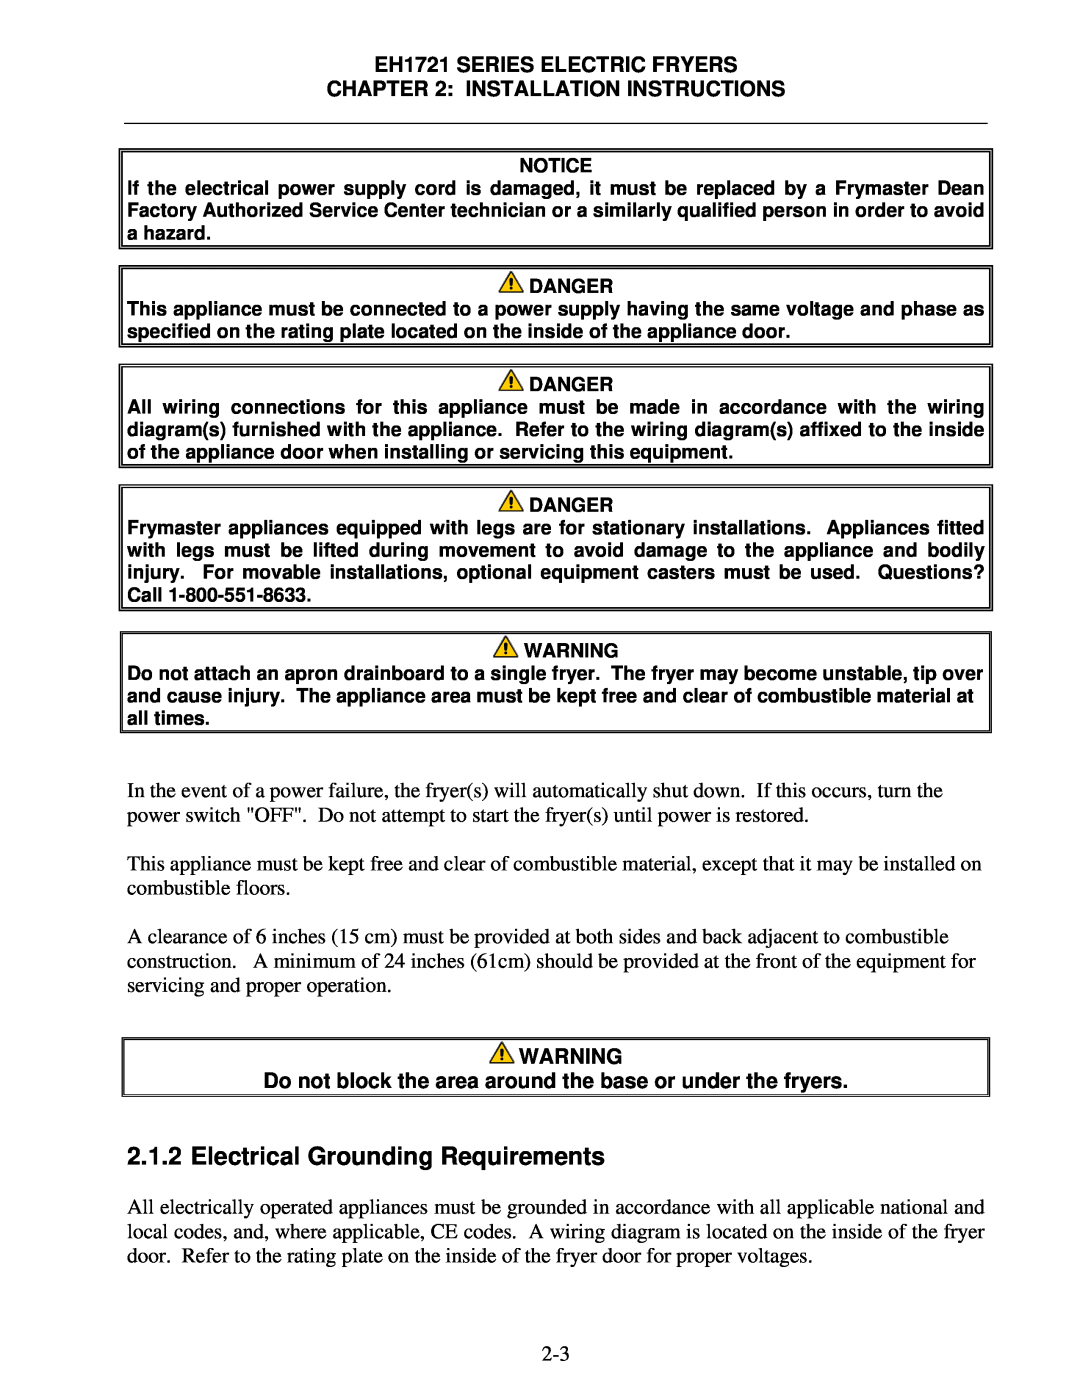 Frymaster operation manual Electrical Grounding Requirements, EH1721 SERIES ELECTRIC FRYERS, Installation Instructions 